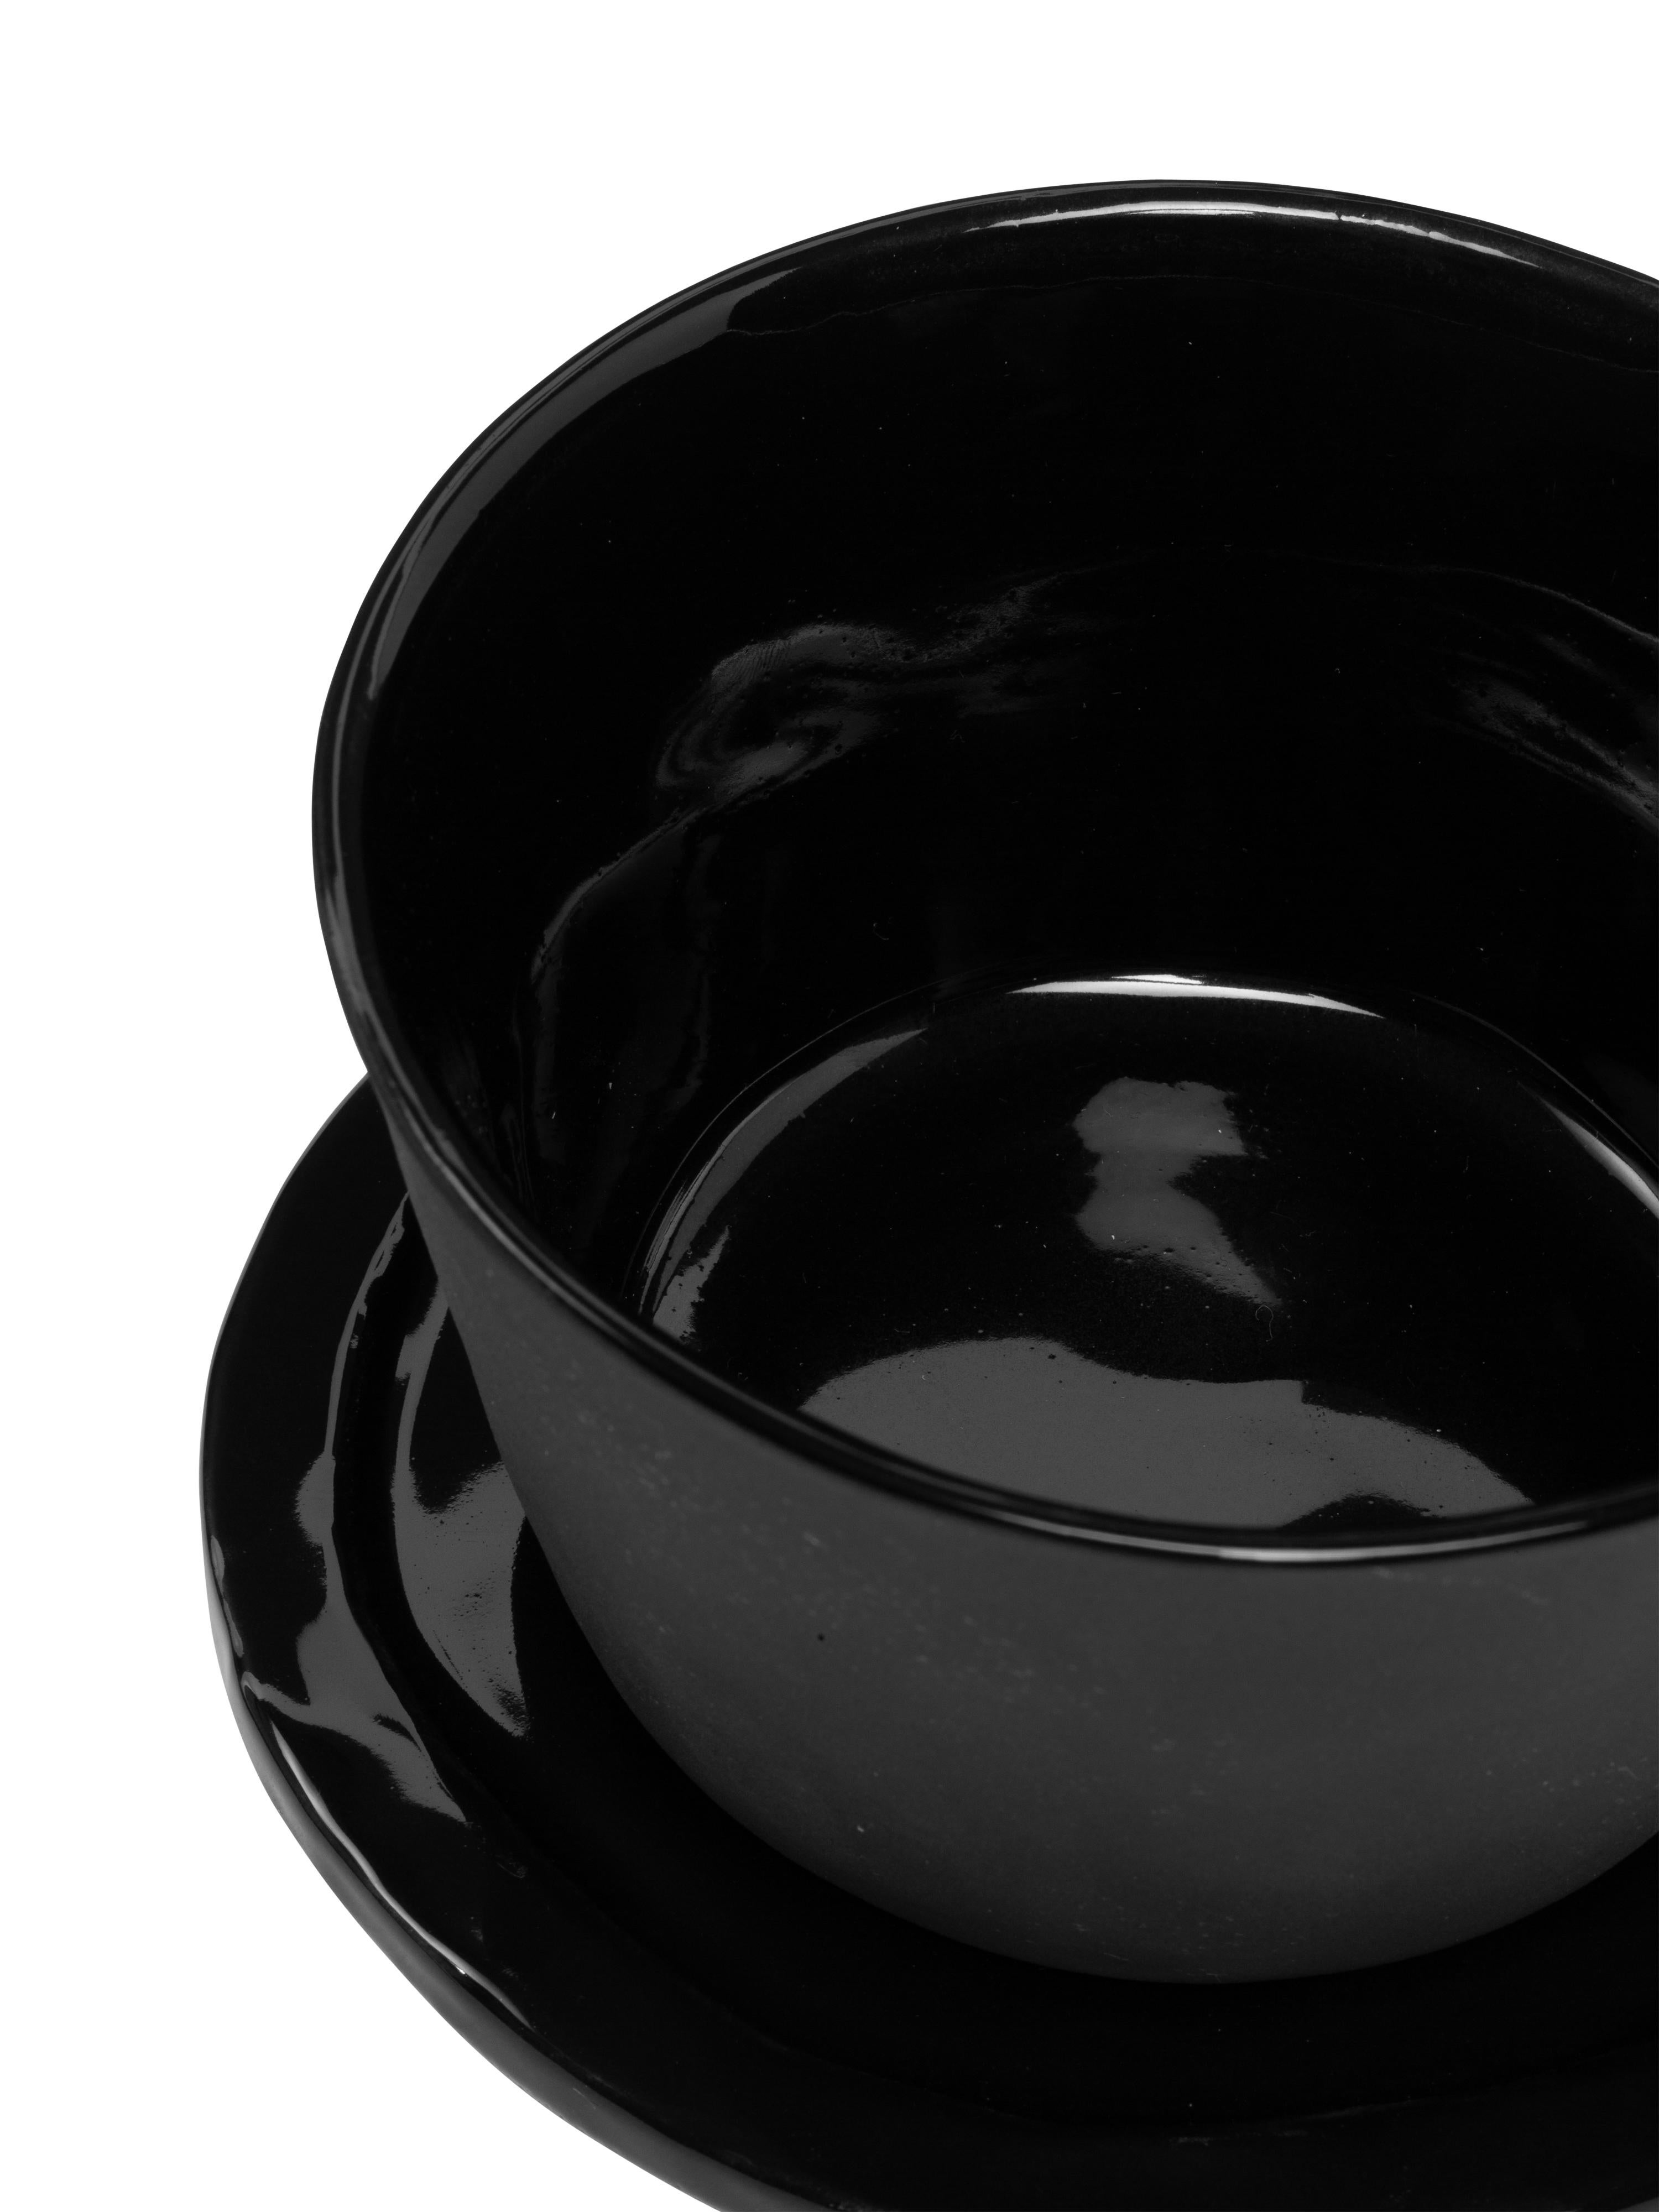 This object has been made from ceramic using an artisan method. Each piece is unique in terms of finish, colours and details. Breakfast Set finish is mat black outside and Glossy Black inside. Breakfast set includes a flat small flat plate with a